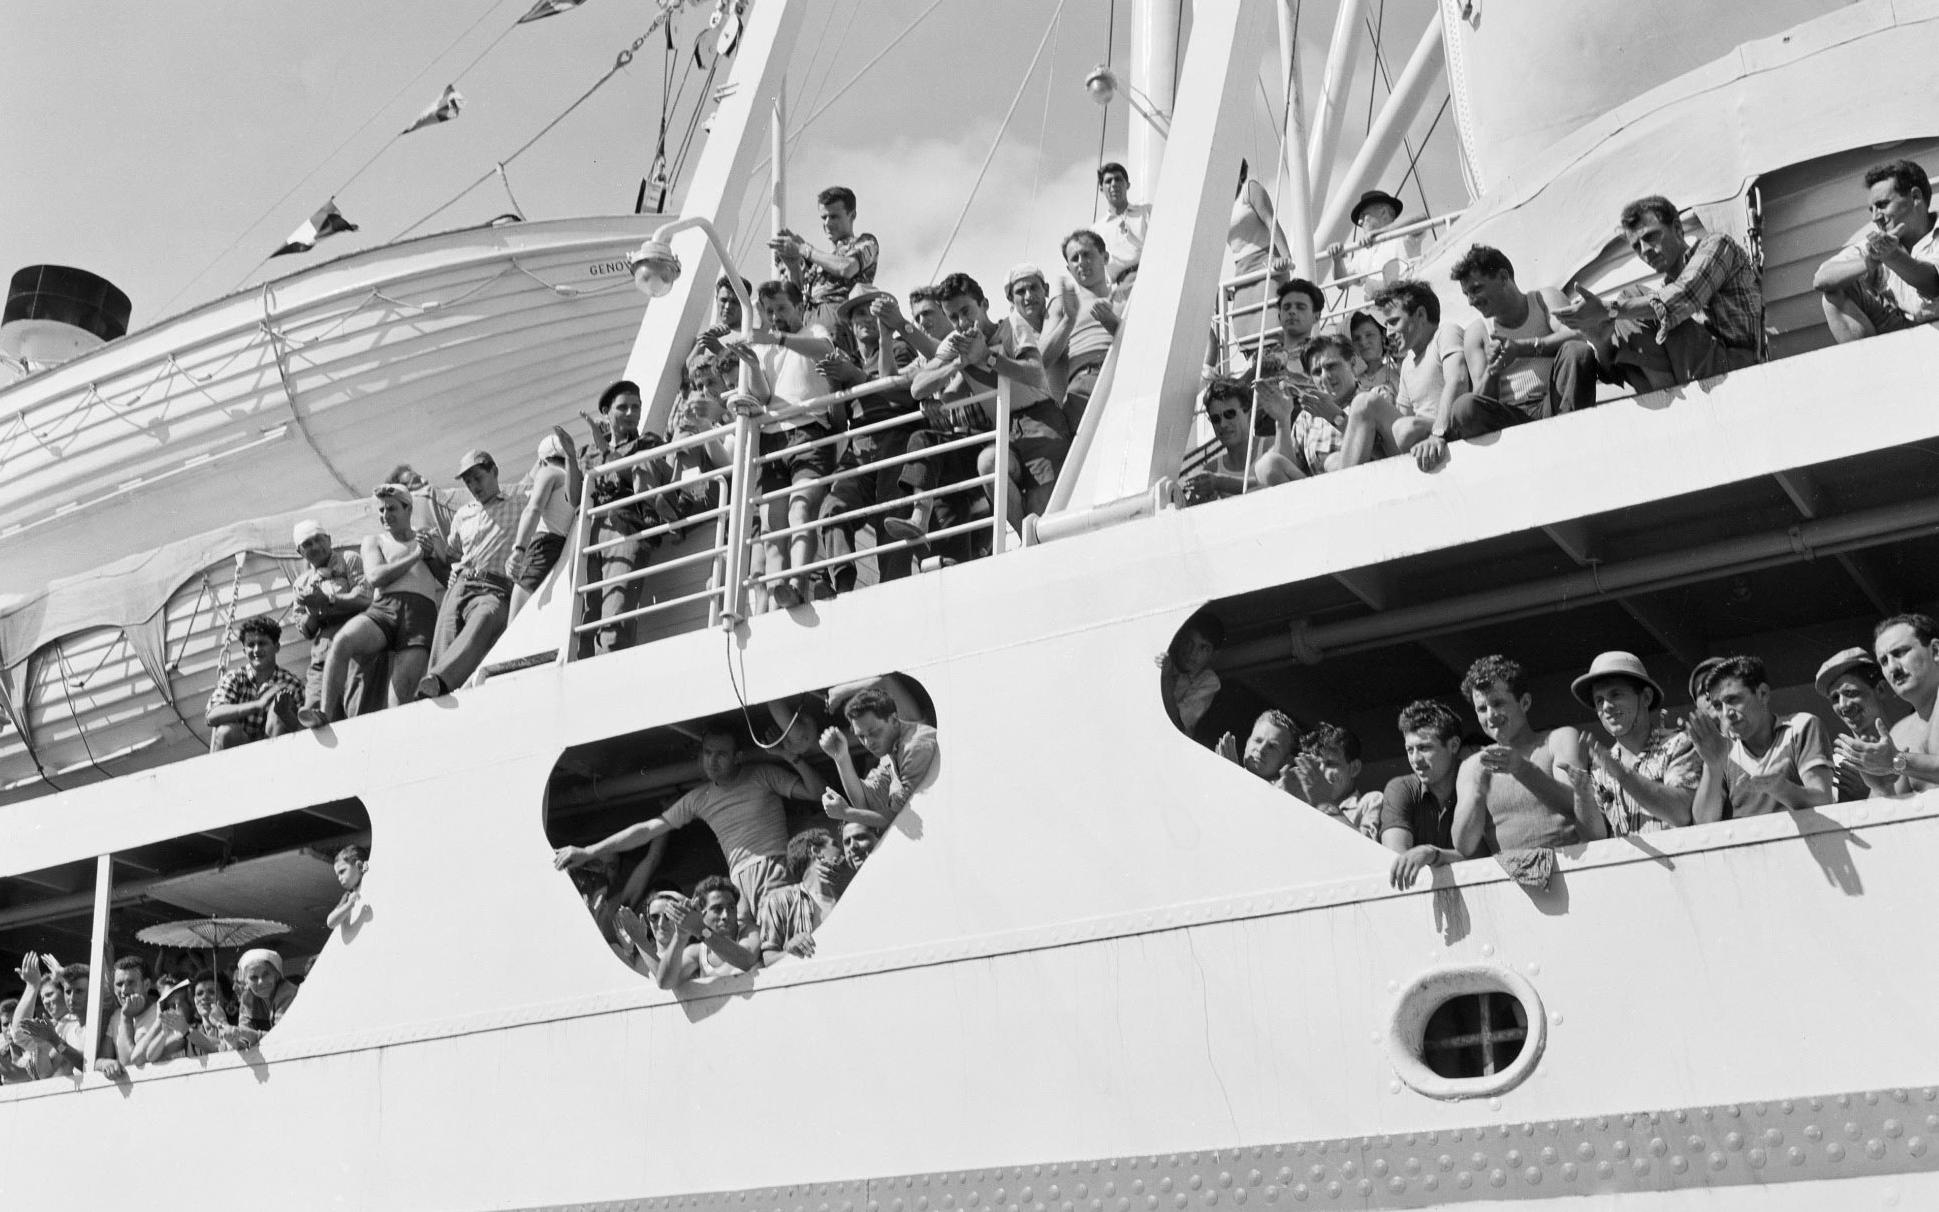 Italian canecutters arrive at Cairns aboard the Aurelia, 1956.